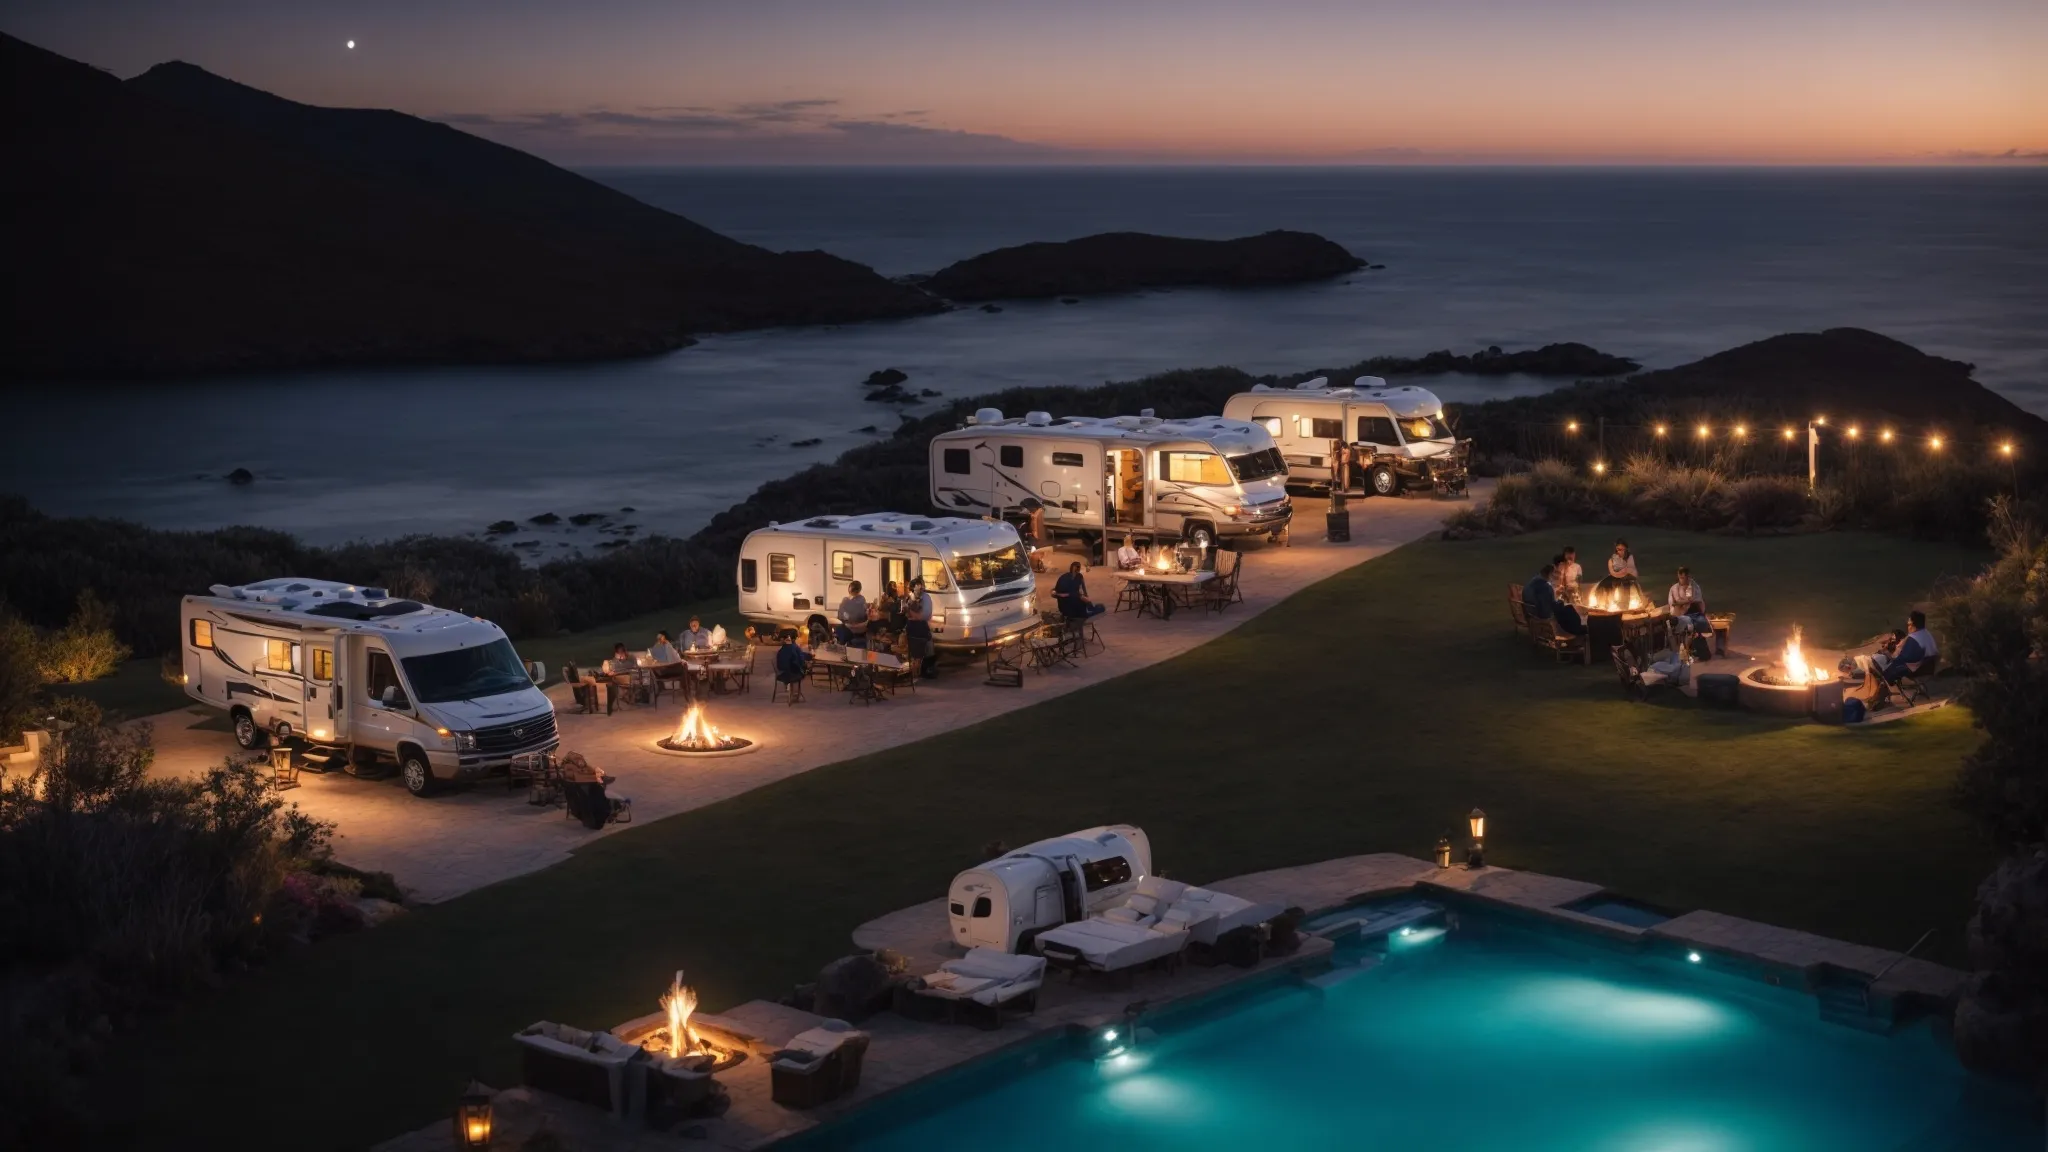 an evening scene featuring luxury rvs parked beside an illuminated pool with the ocean and mountains in the distance, as guests gather around a fire pit under the stars.